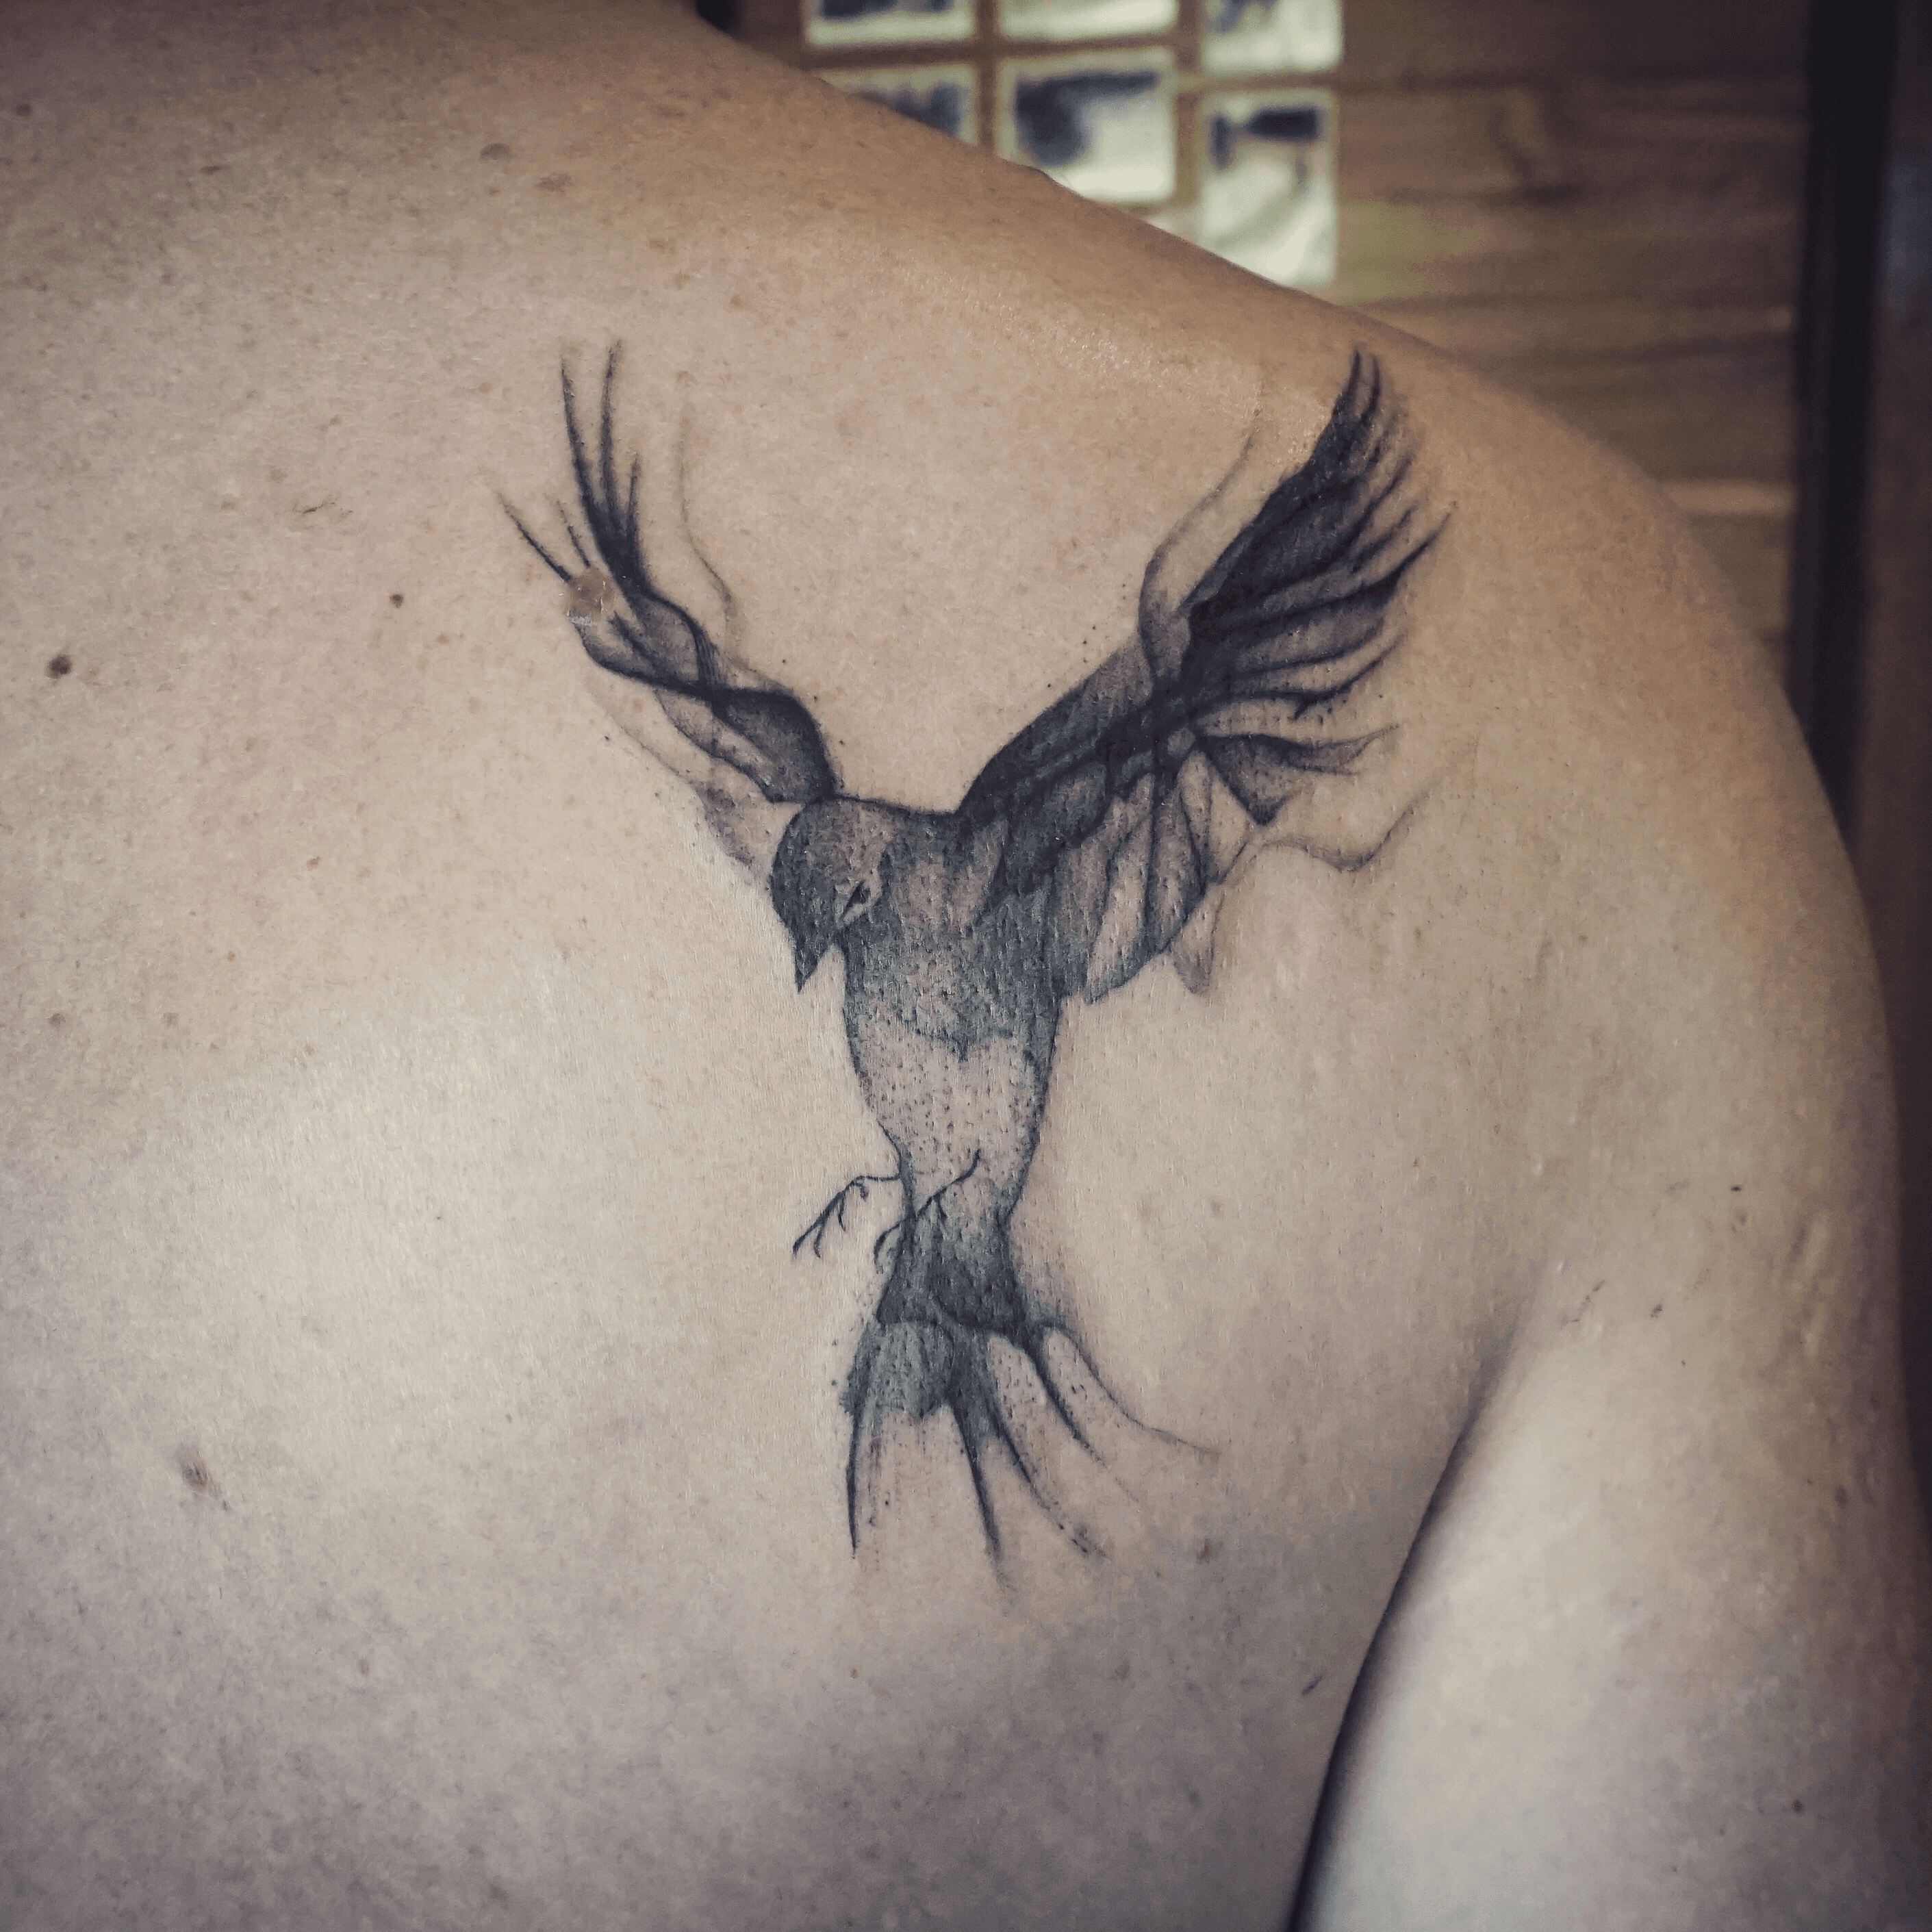 Bird tattoo by Uncl Paul Knows  Post 29276